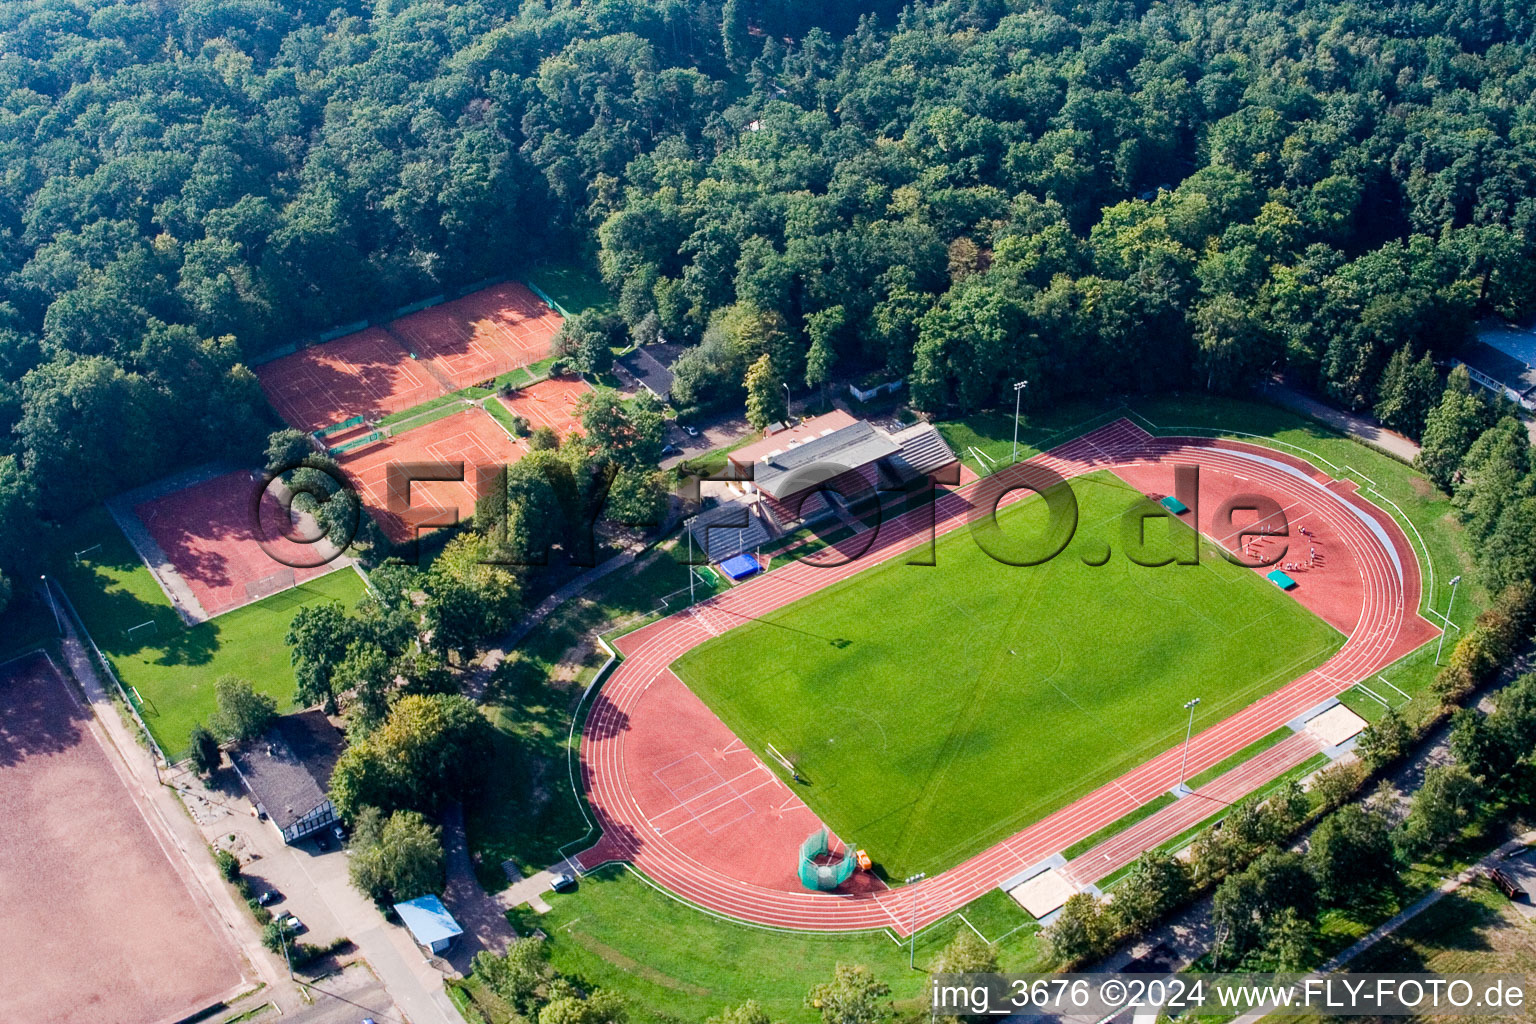 Ensemble of sports grounds Bienwaldstadion and Tennisclub in Kandel in the state Rhineland-Palatinate